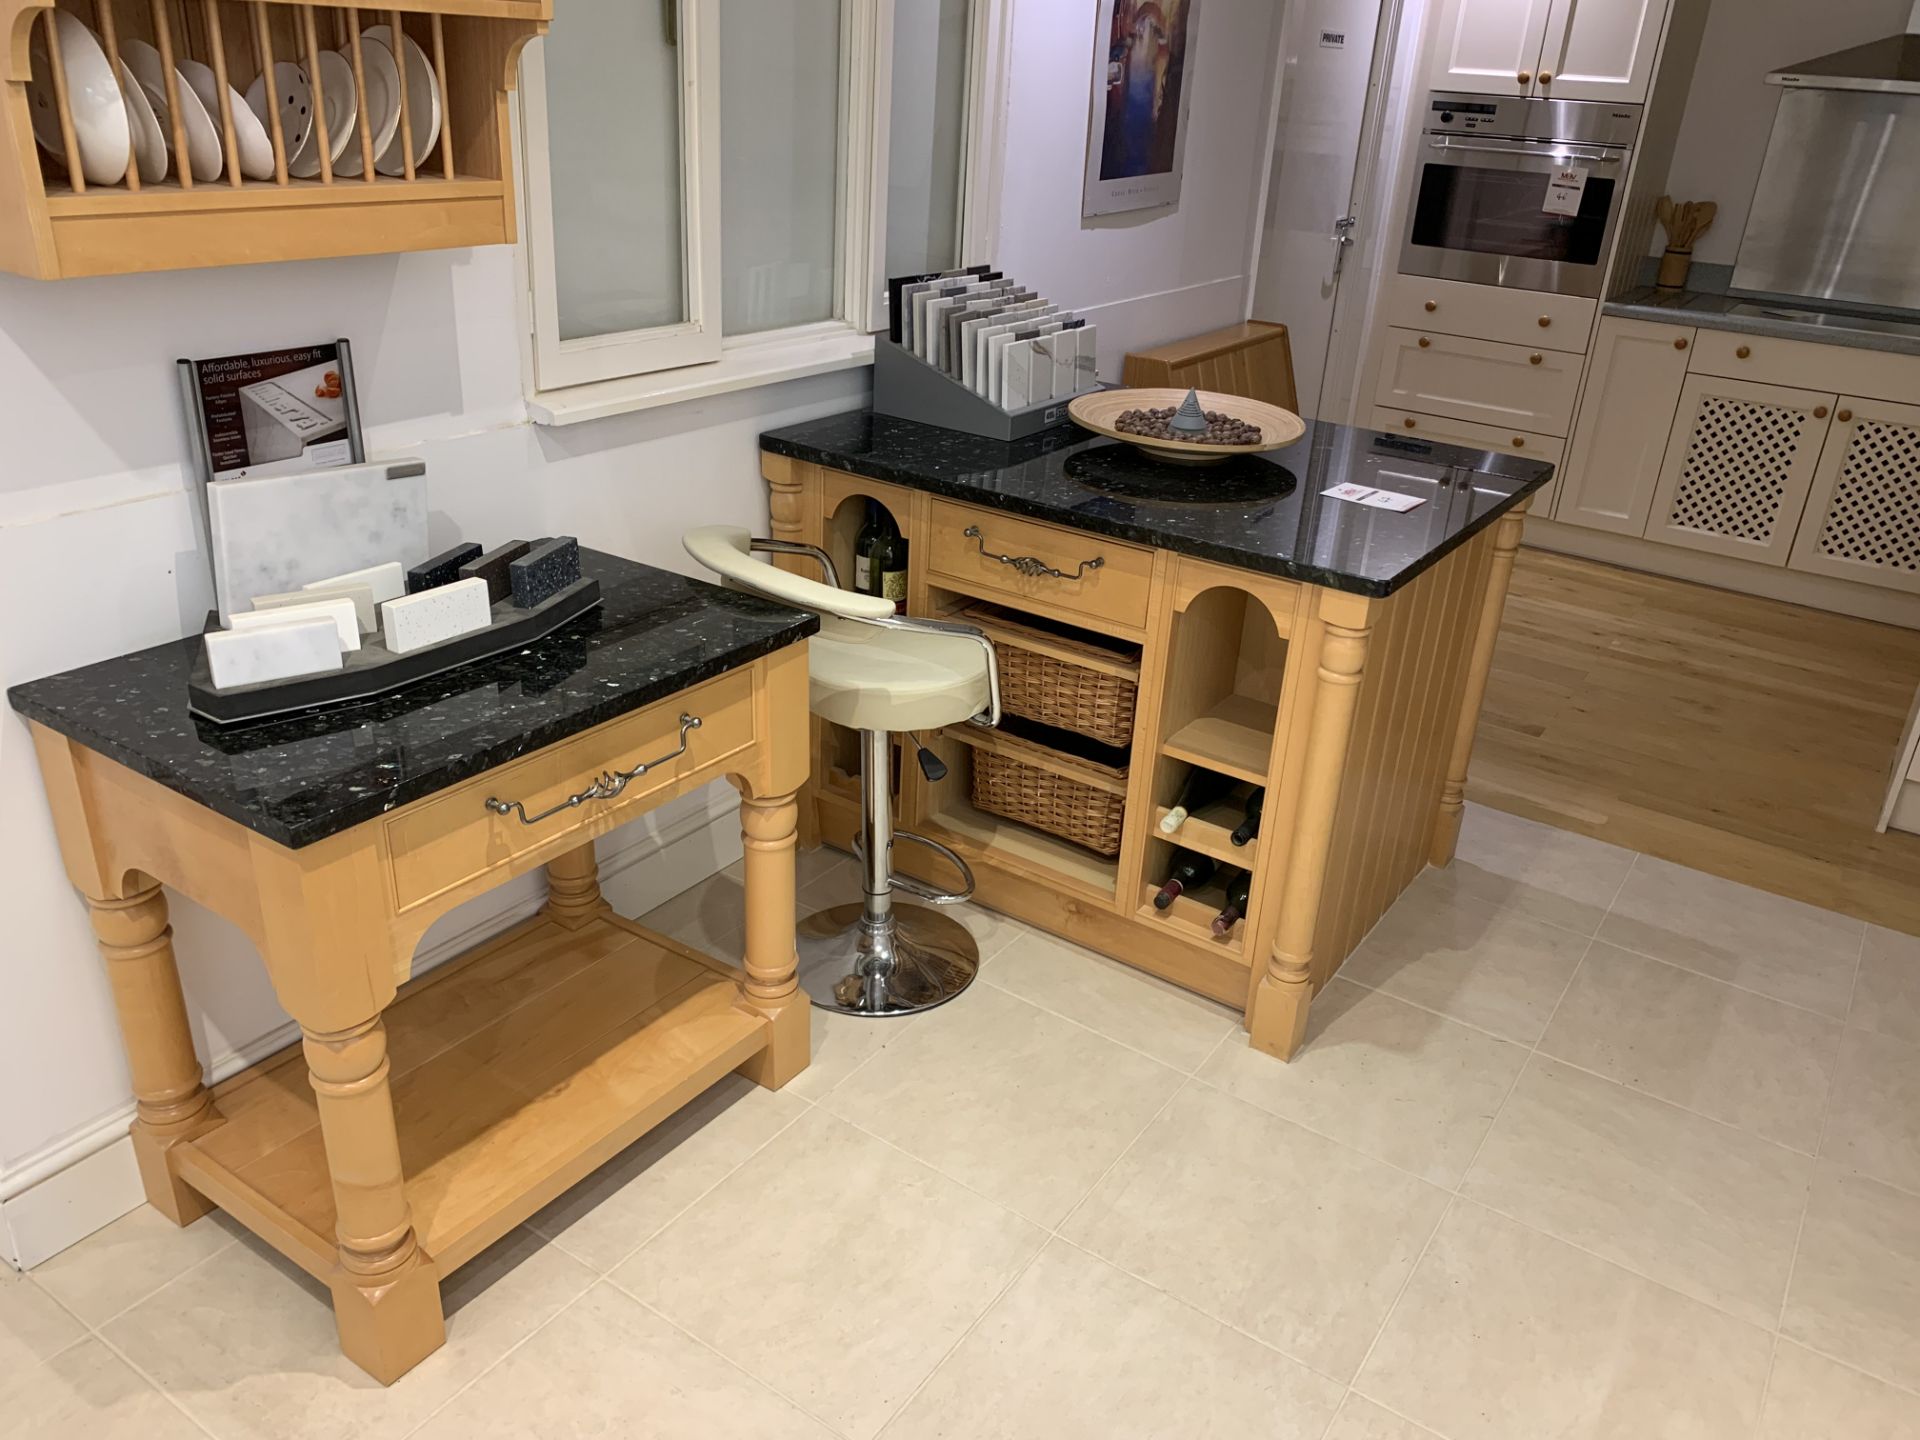 Display kitchen island, table, bench & wall rack in pine with black granite tops